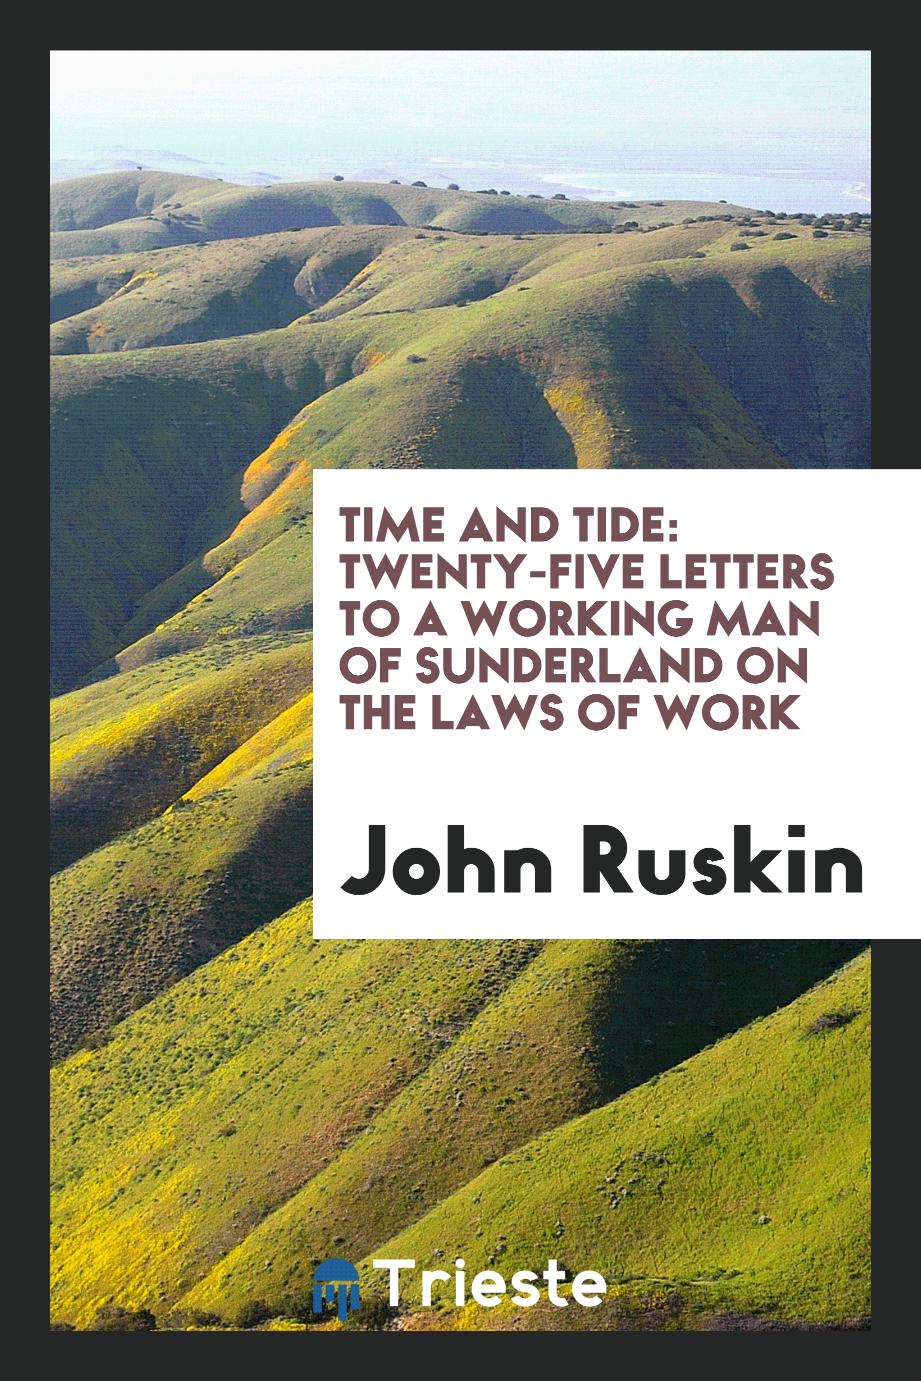 Time and Tide: Twenty-Five Letters to a Working Man of Sunderland on the Laws of Work